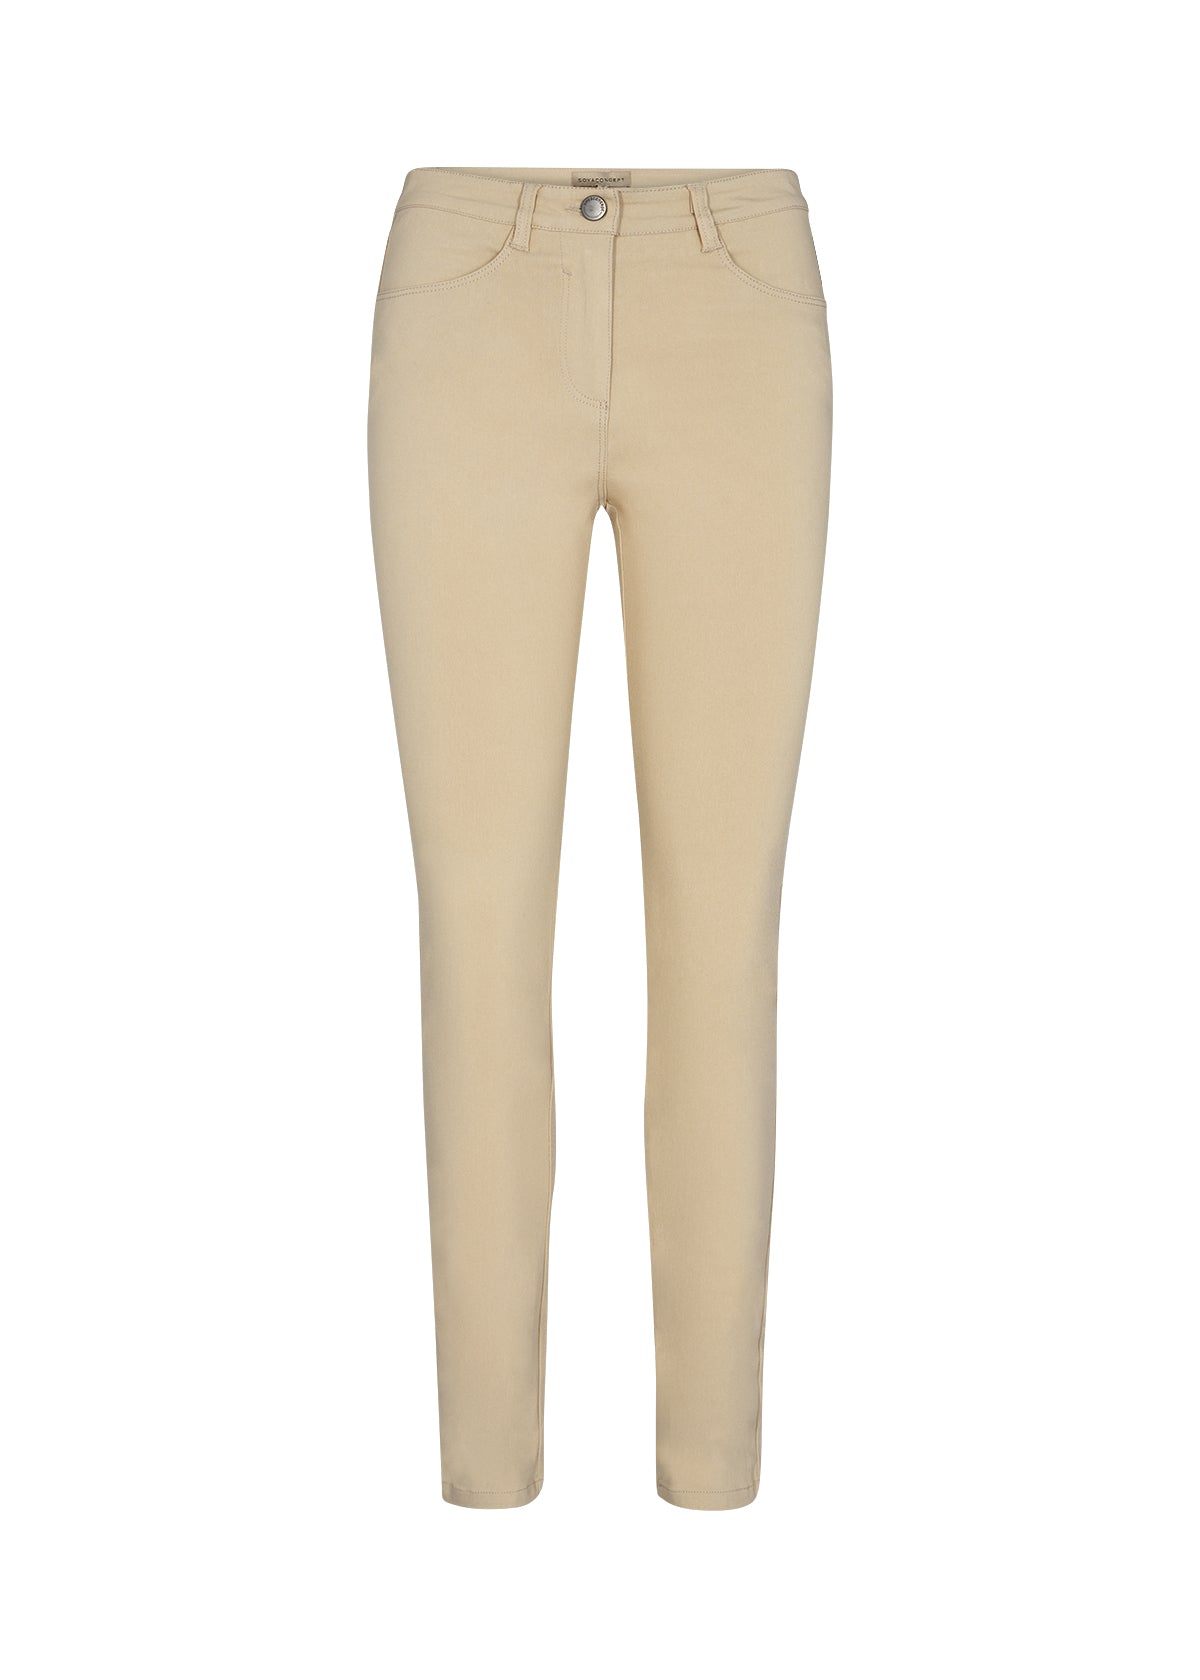 SOYA CONCEPT Classic Sand Lilly 1-B Slim Fit Jegging